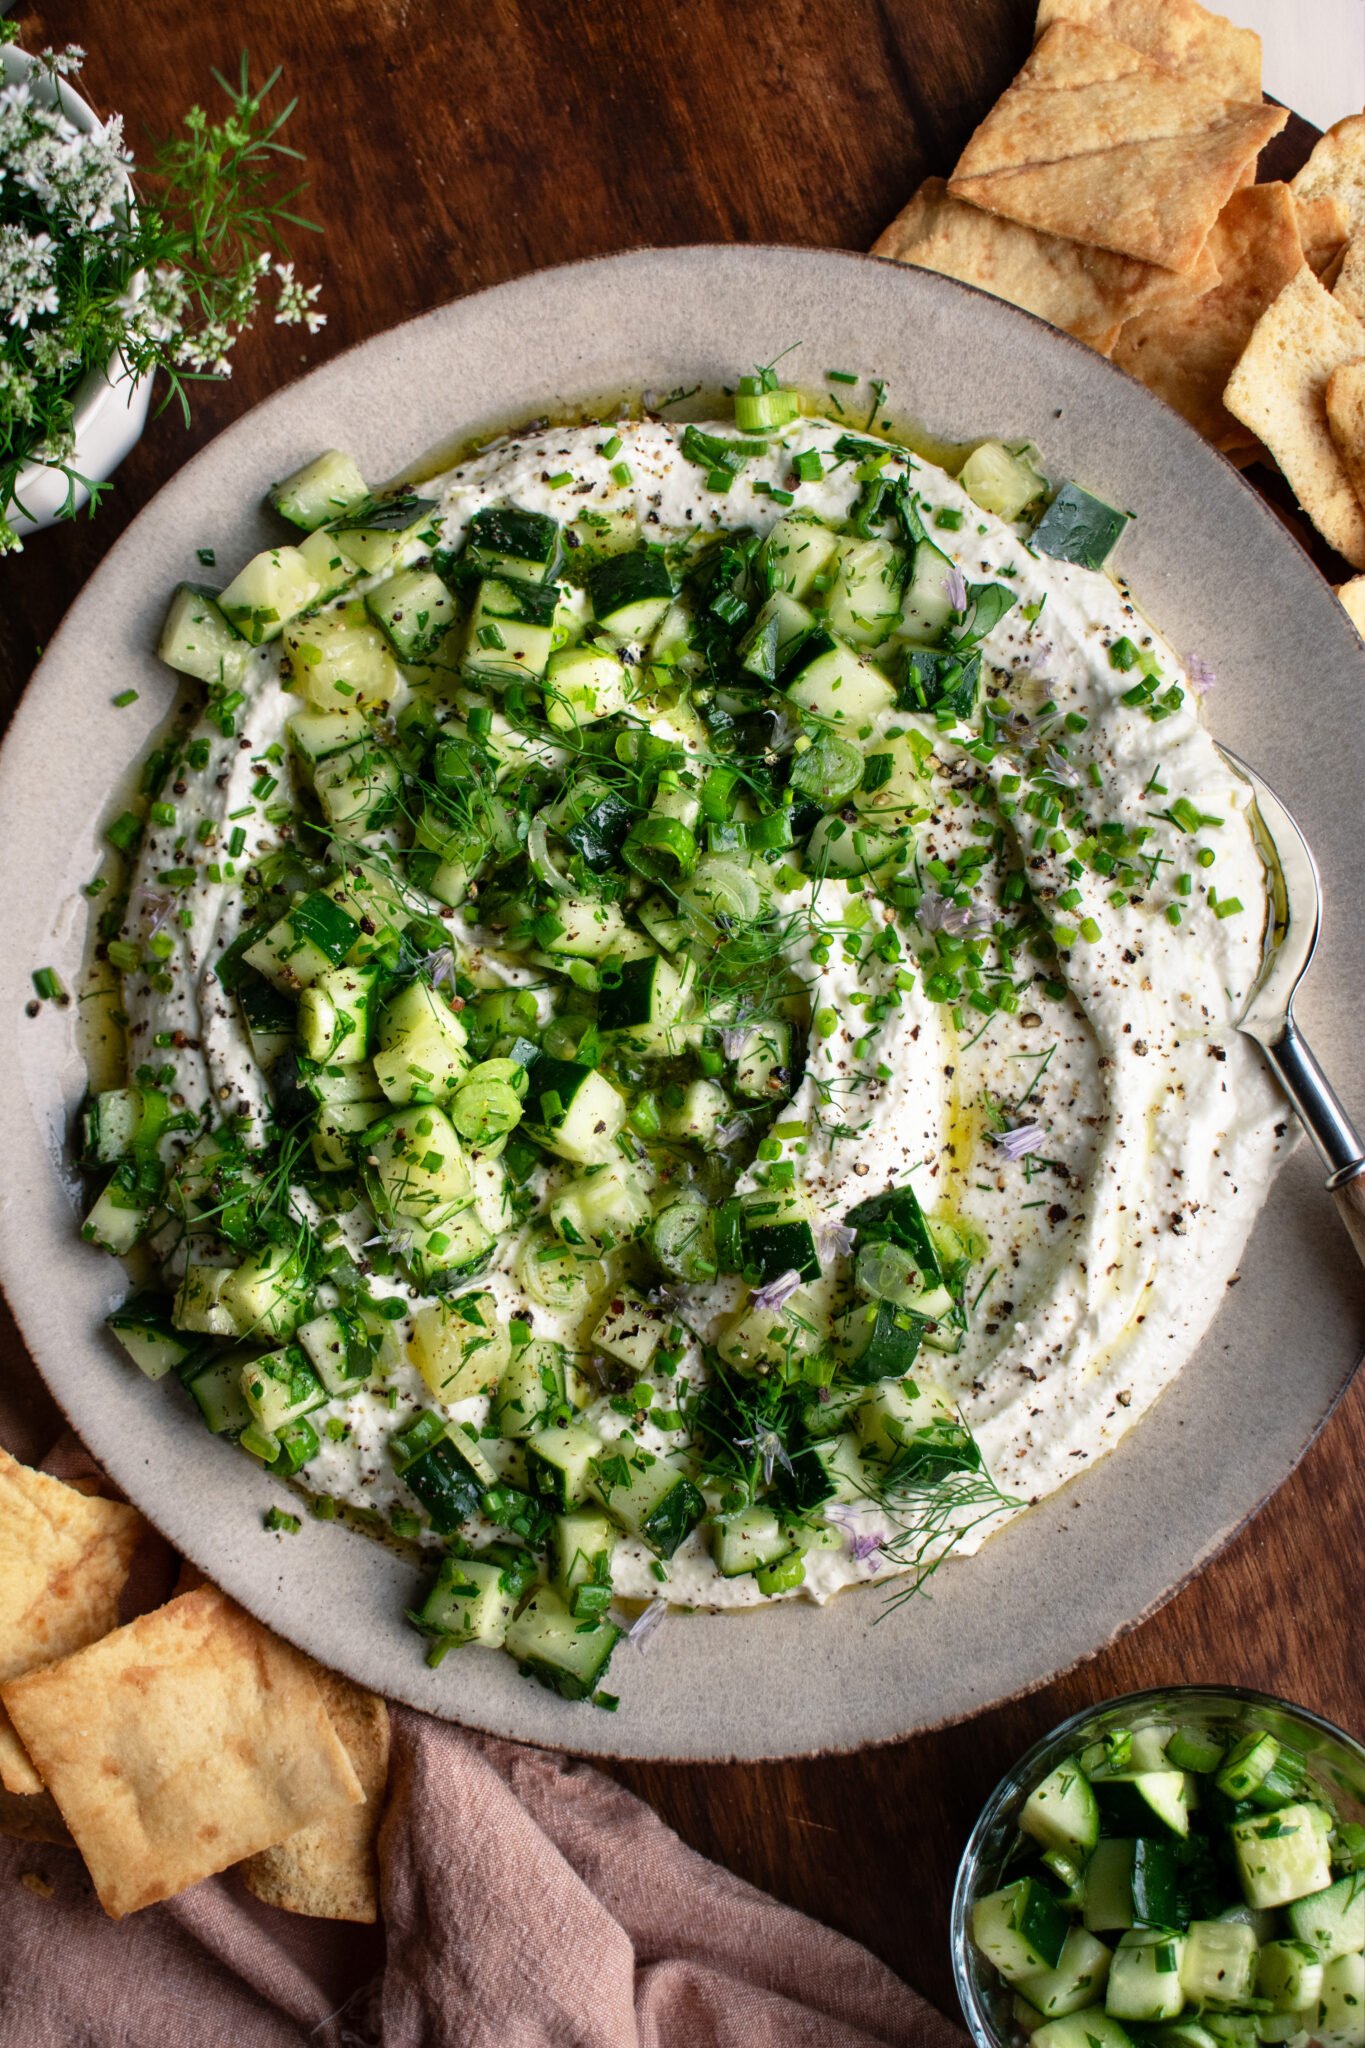 Whipped Feta Dip with Cucumber Salad